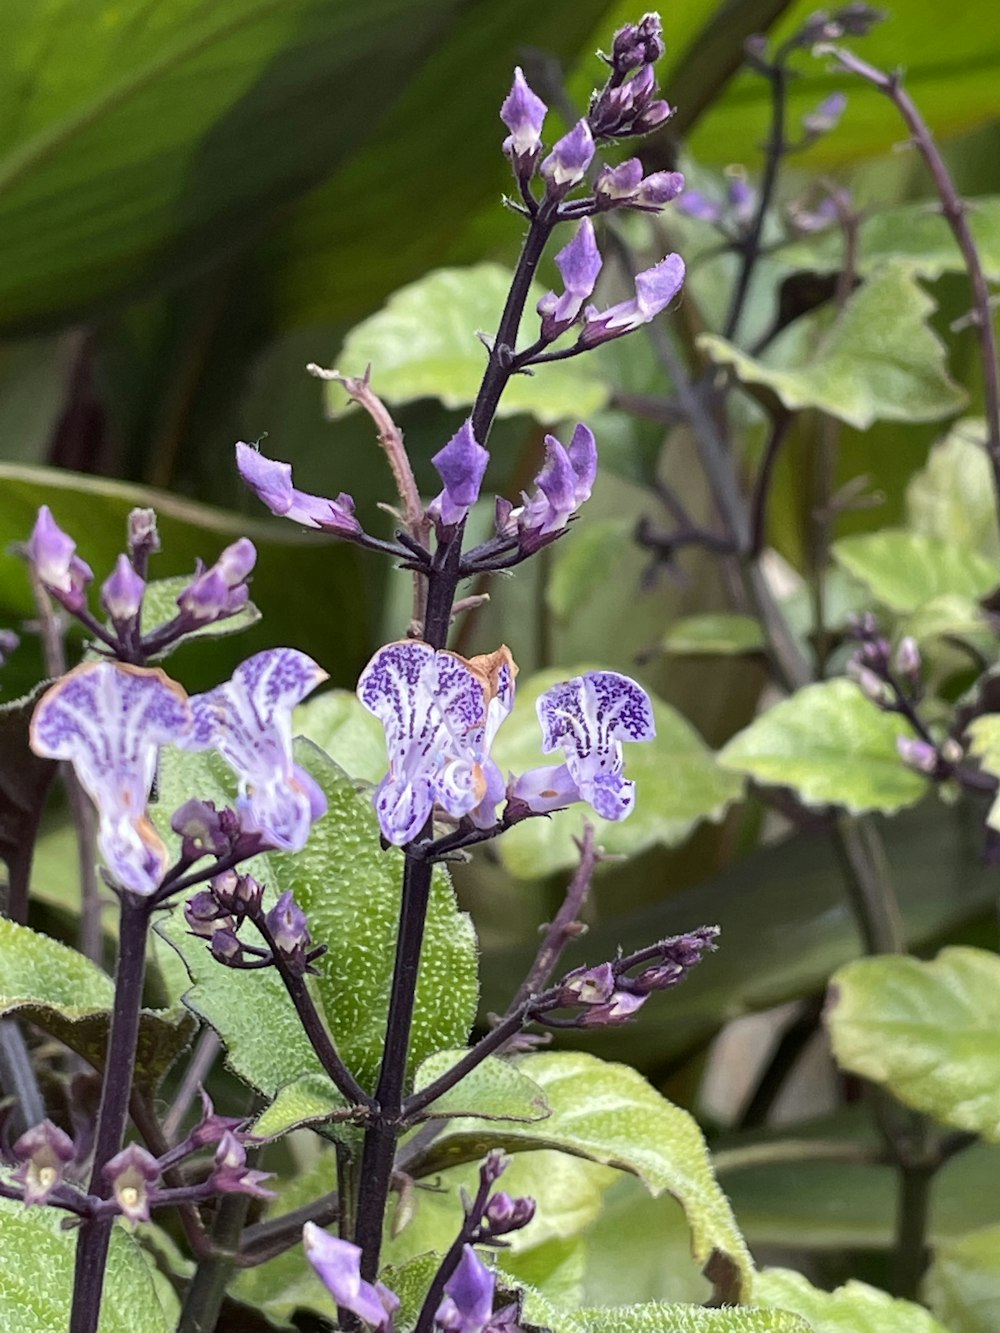 purple flowers with green leaves in the background